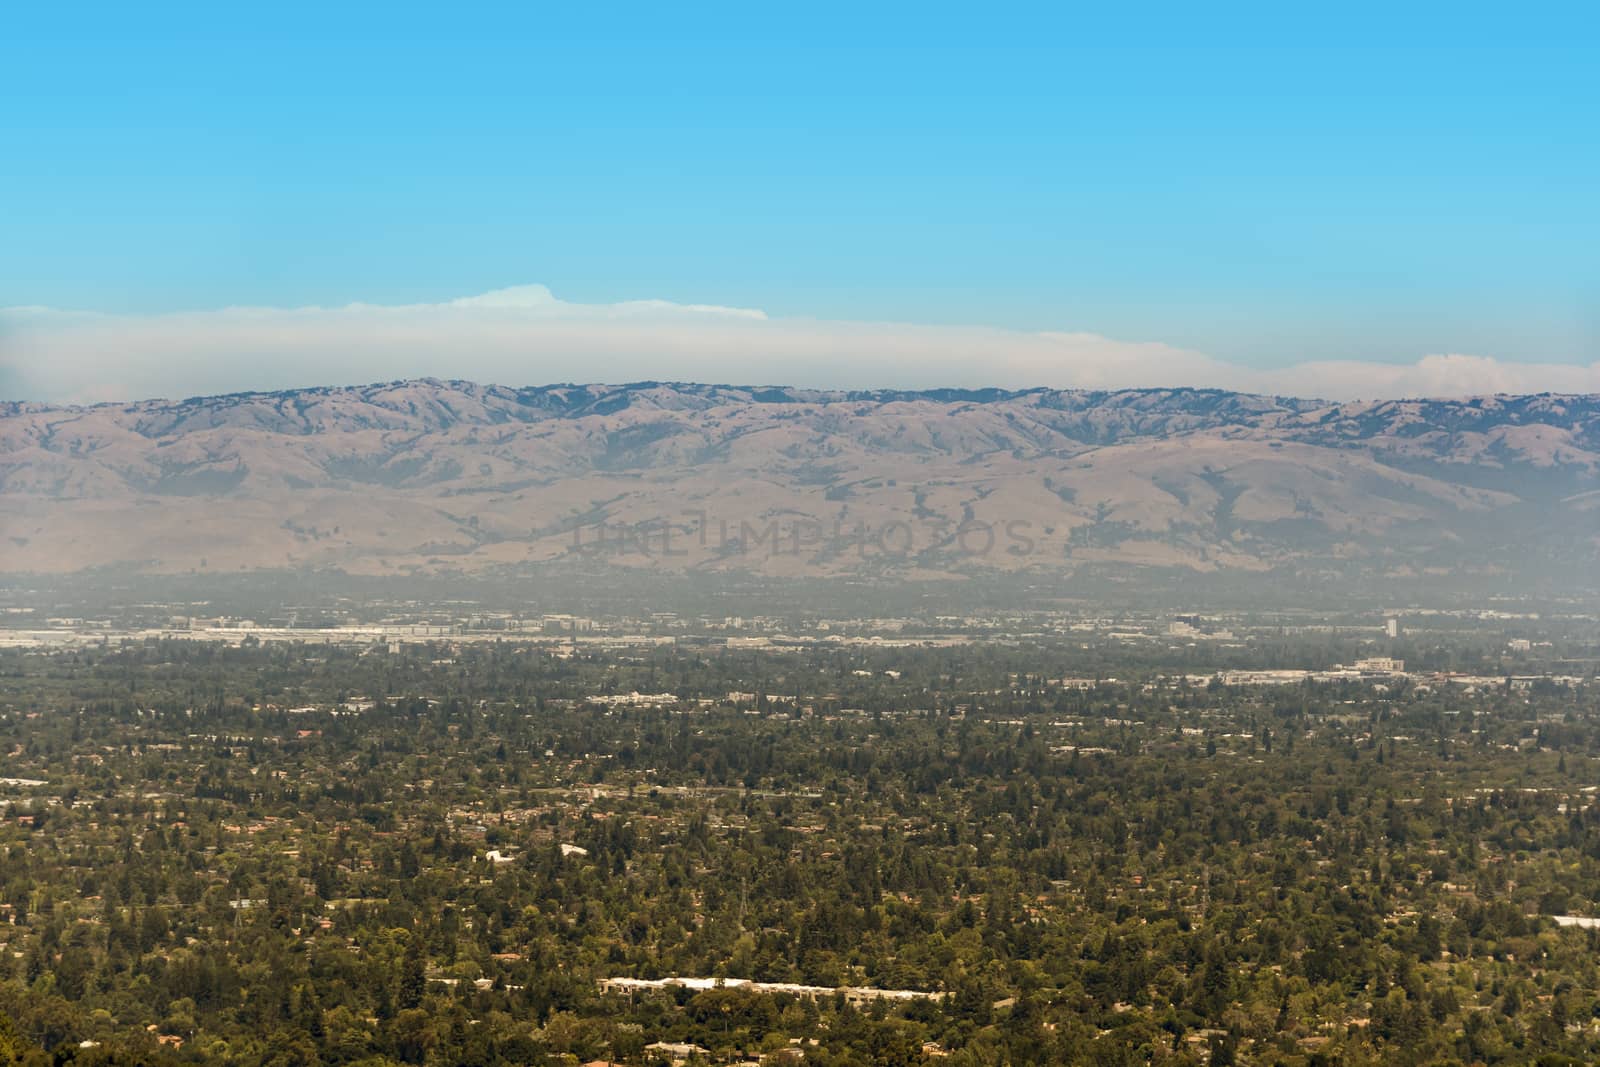 South San Francisco Bay, also called Silicon Valley, with visible smog above the area on a sunny day. The part we see on the image is south San Jose.